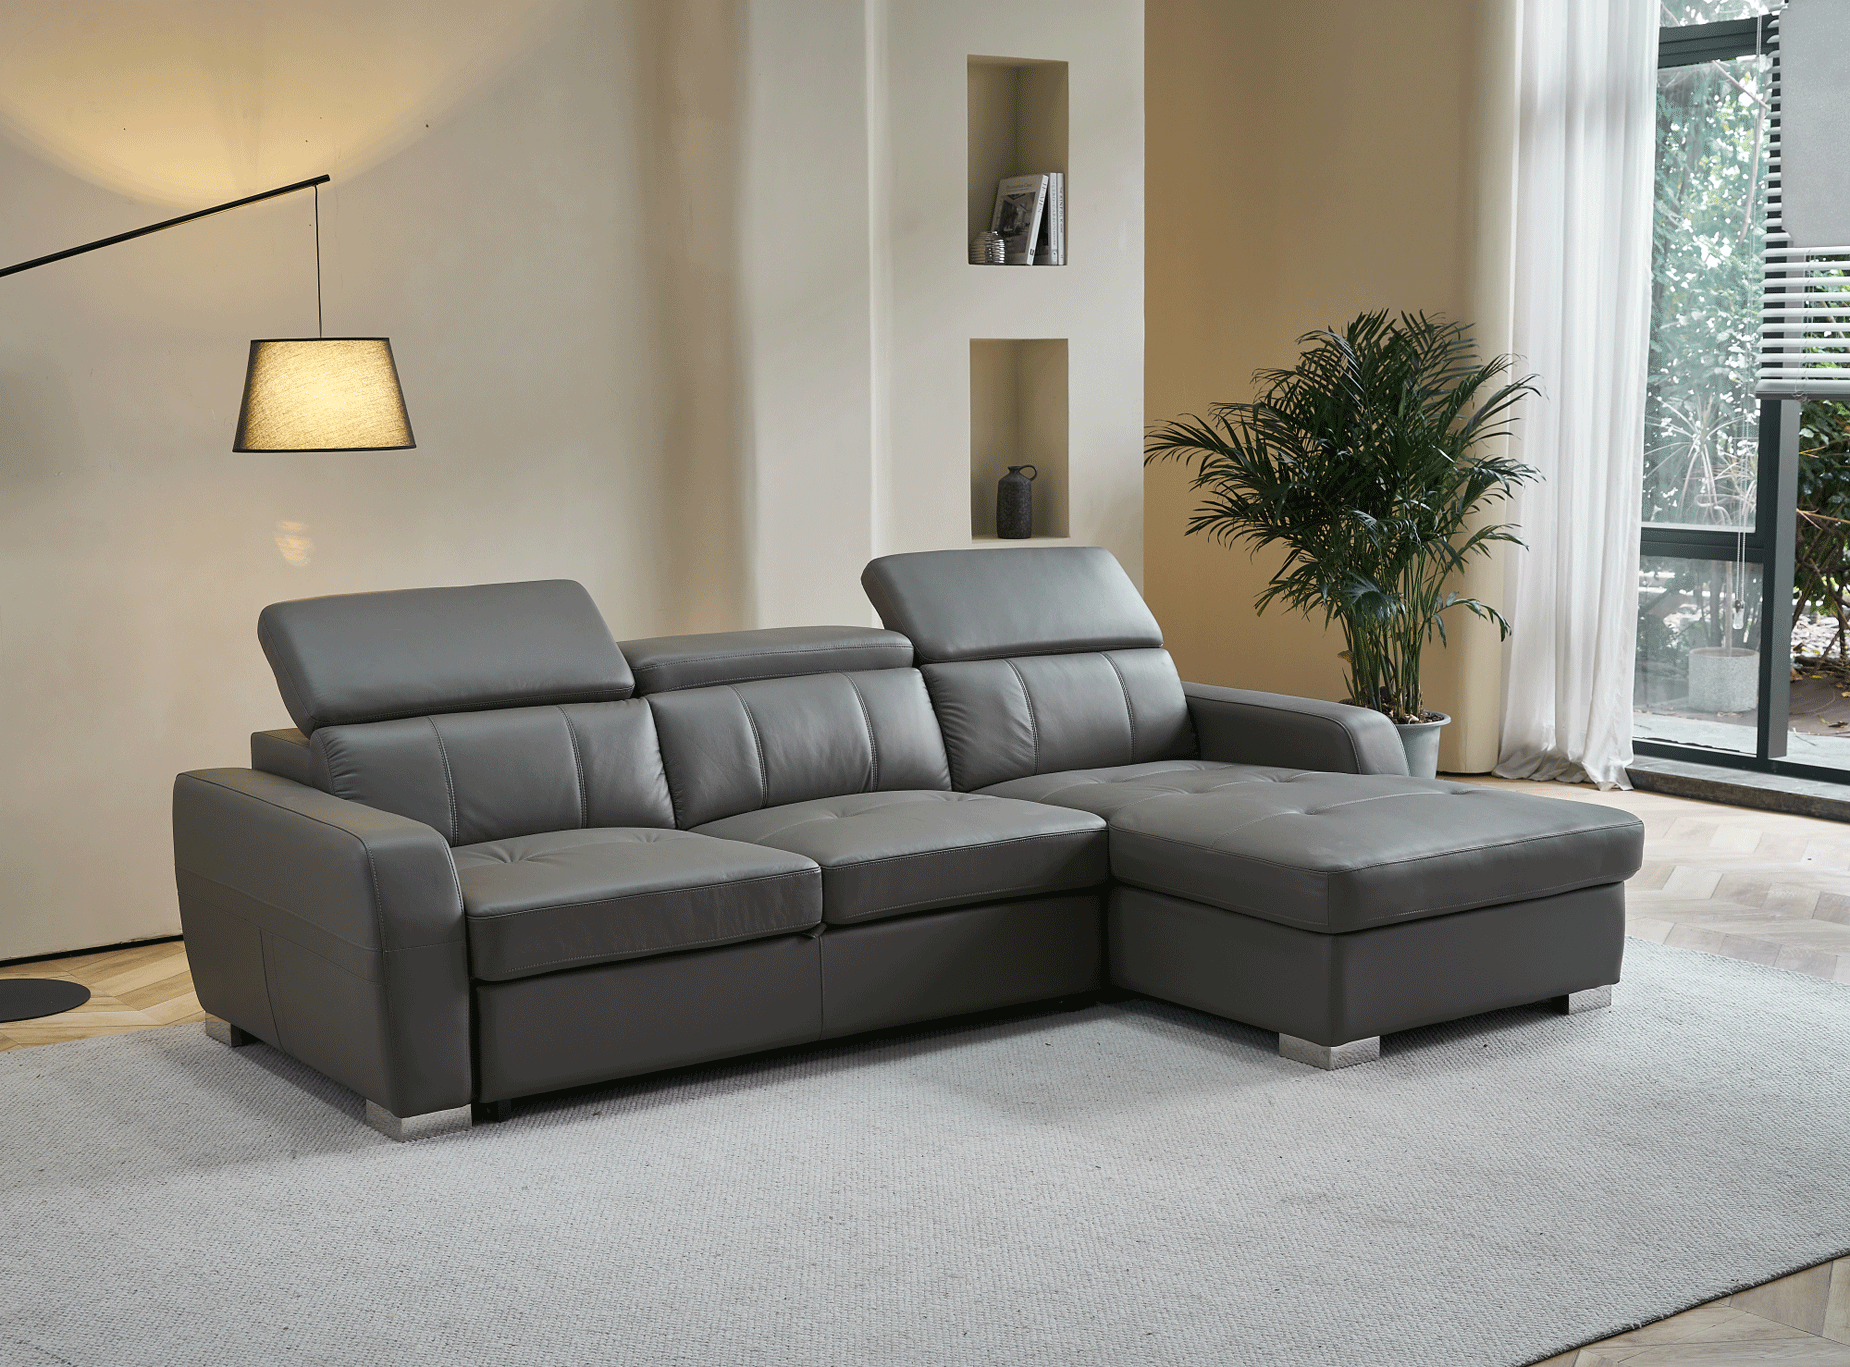 Living Room Furniture Sofas Loveseats and Chairs 1822 GREY Sectional Right w/Bed